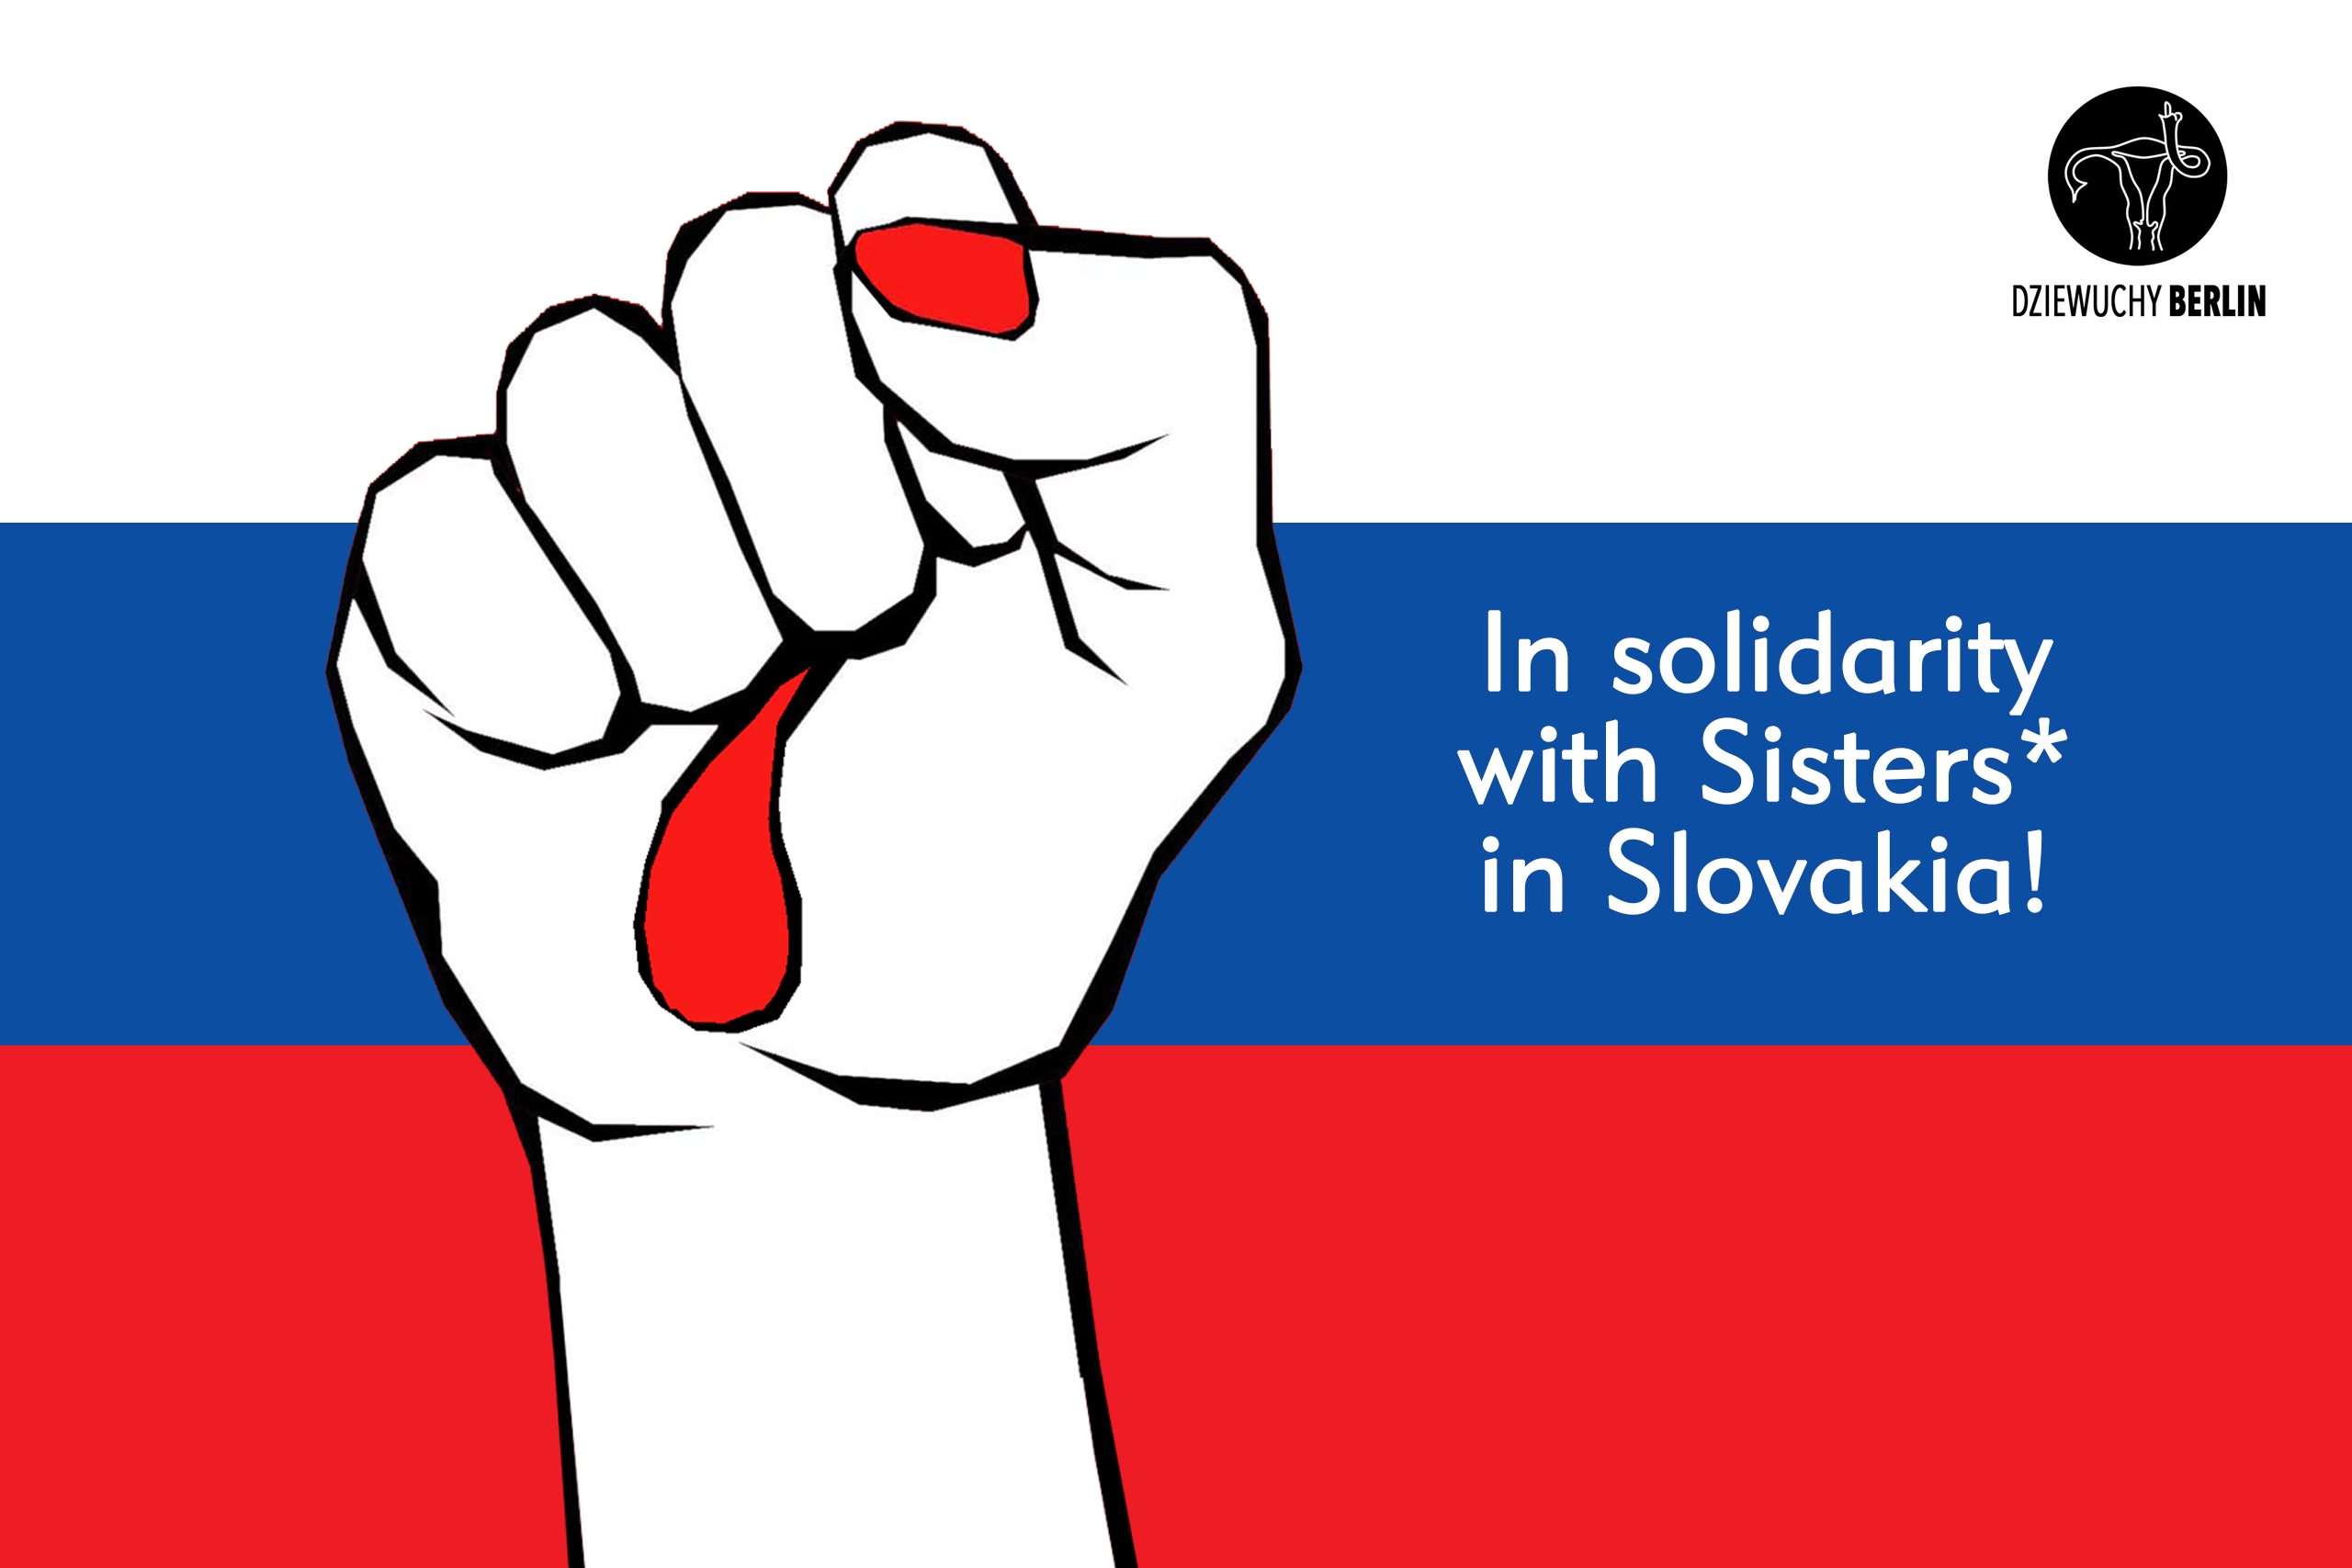 In solidarity with Sisters* in Slovakia